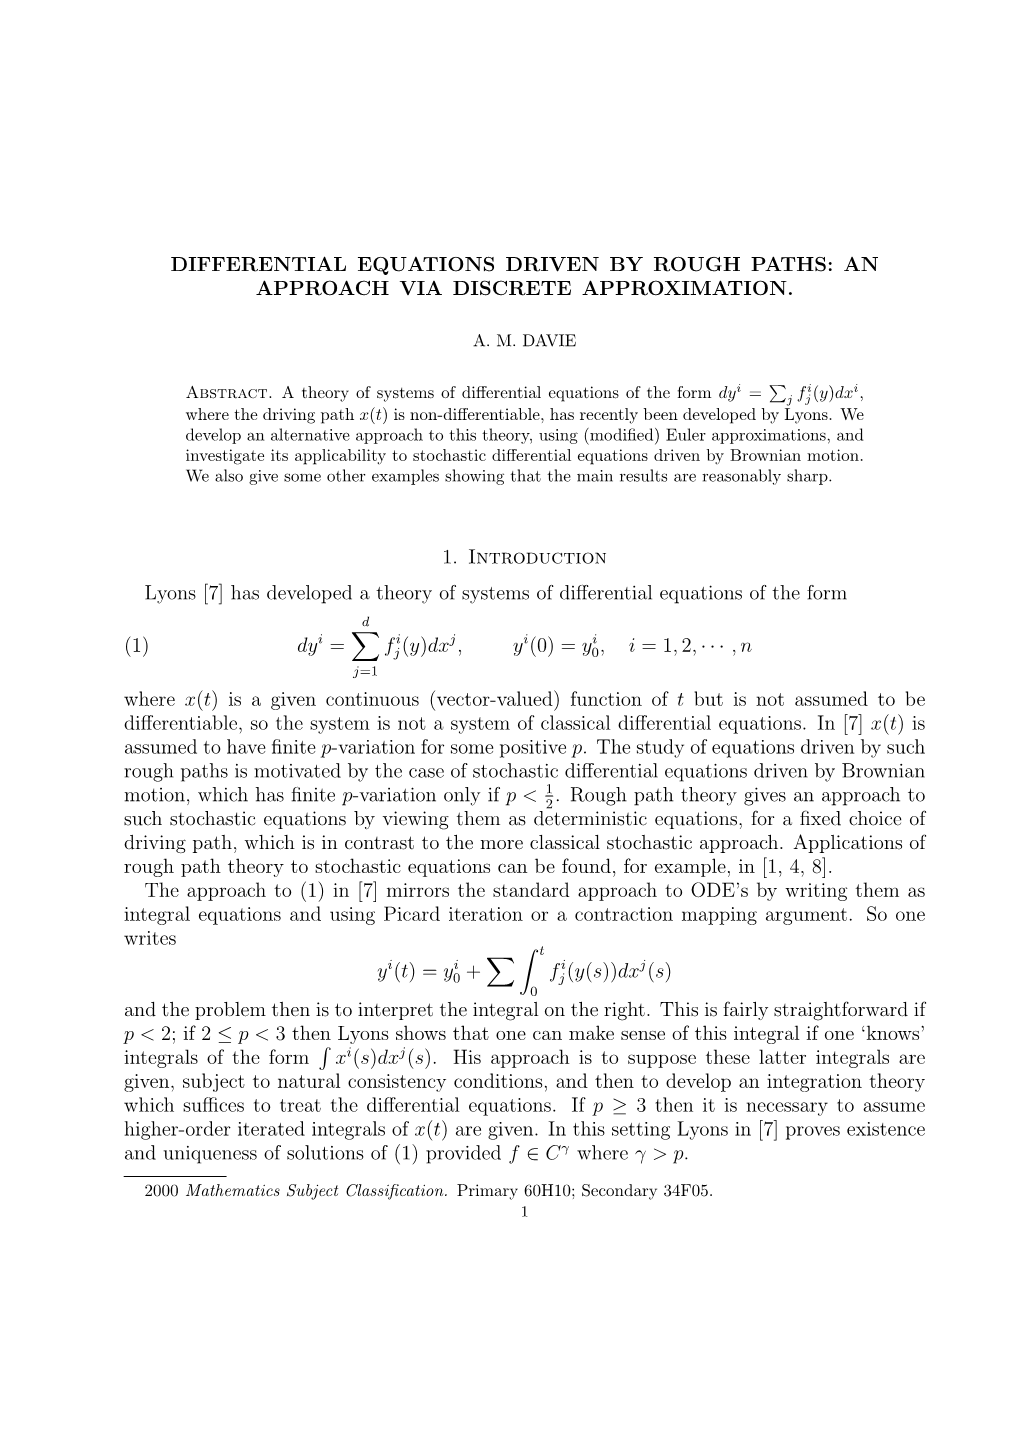 Differential Equations Driven by Rough Paths: an Approach Via Discrete Approximation